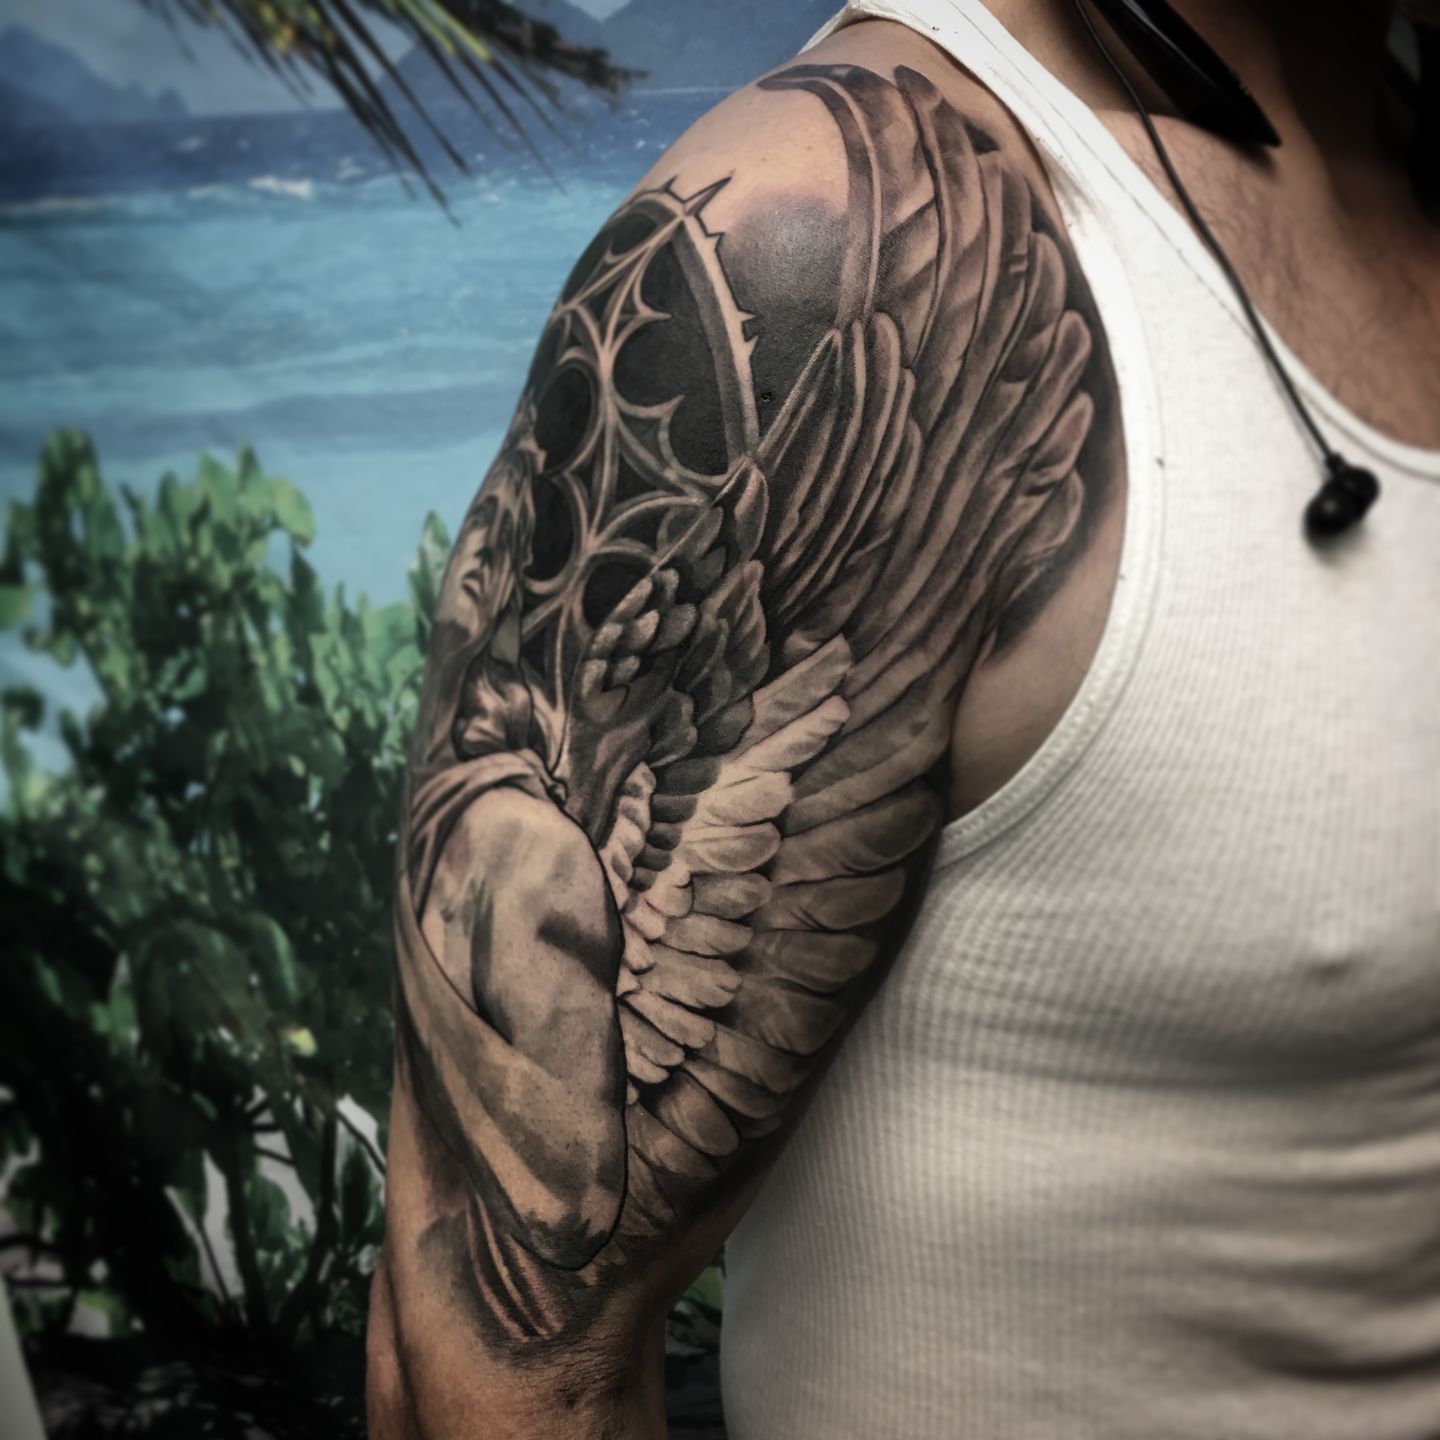 Angel Tattoo  Large Black and Grey Scale Angel located on b  Vince  Wishart  Flickr